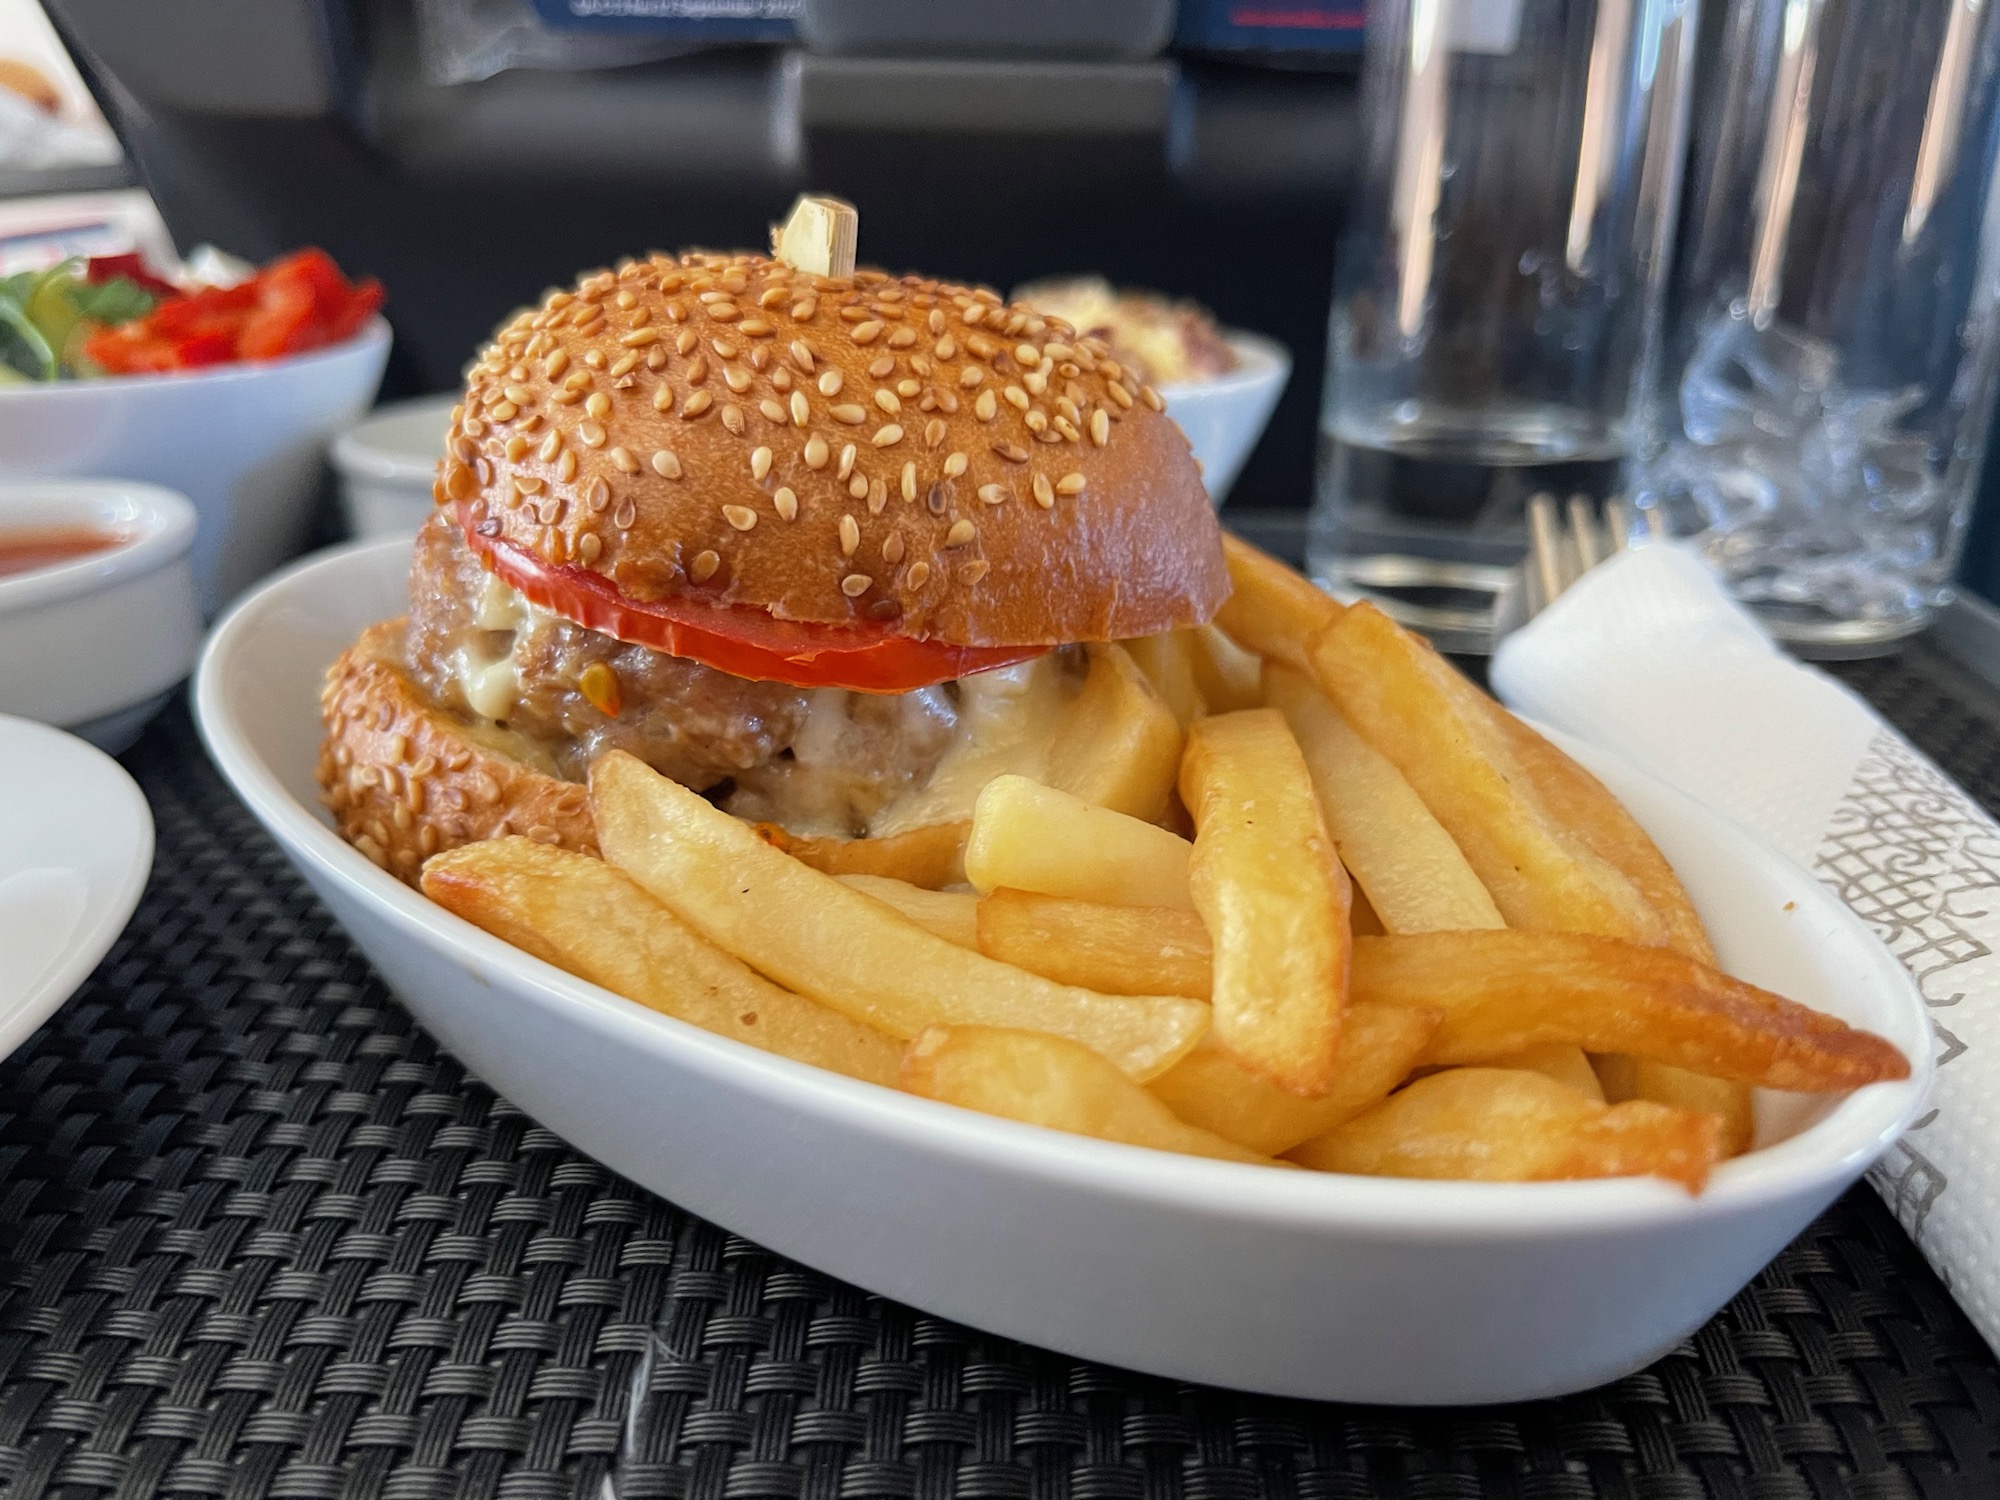 a burger and fries in a bowl